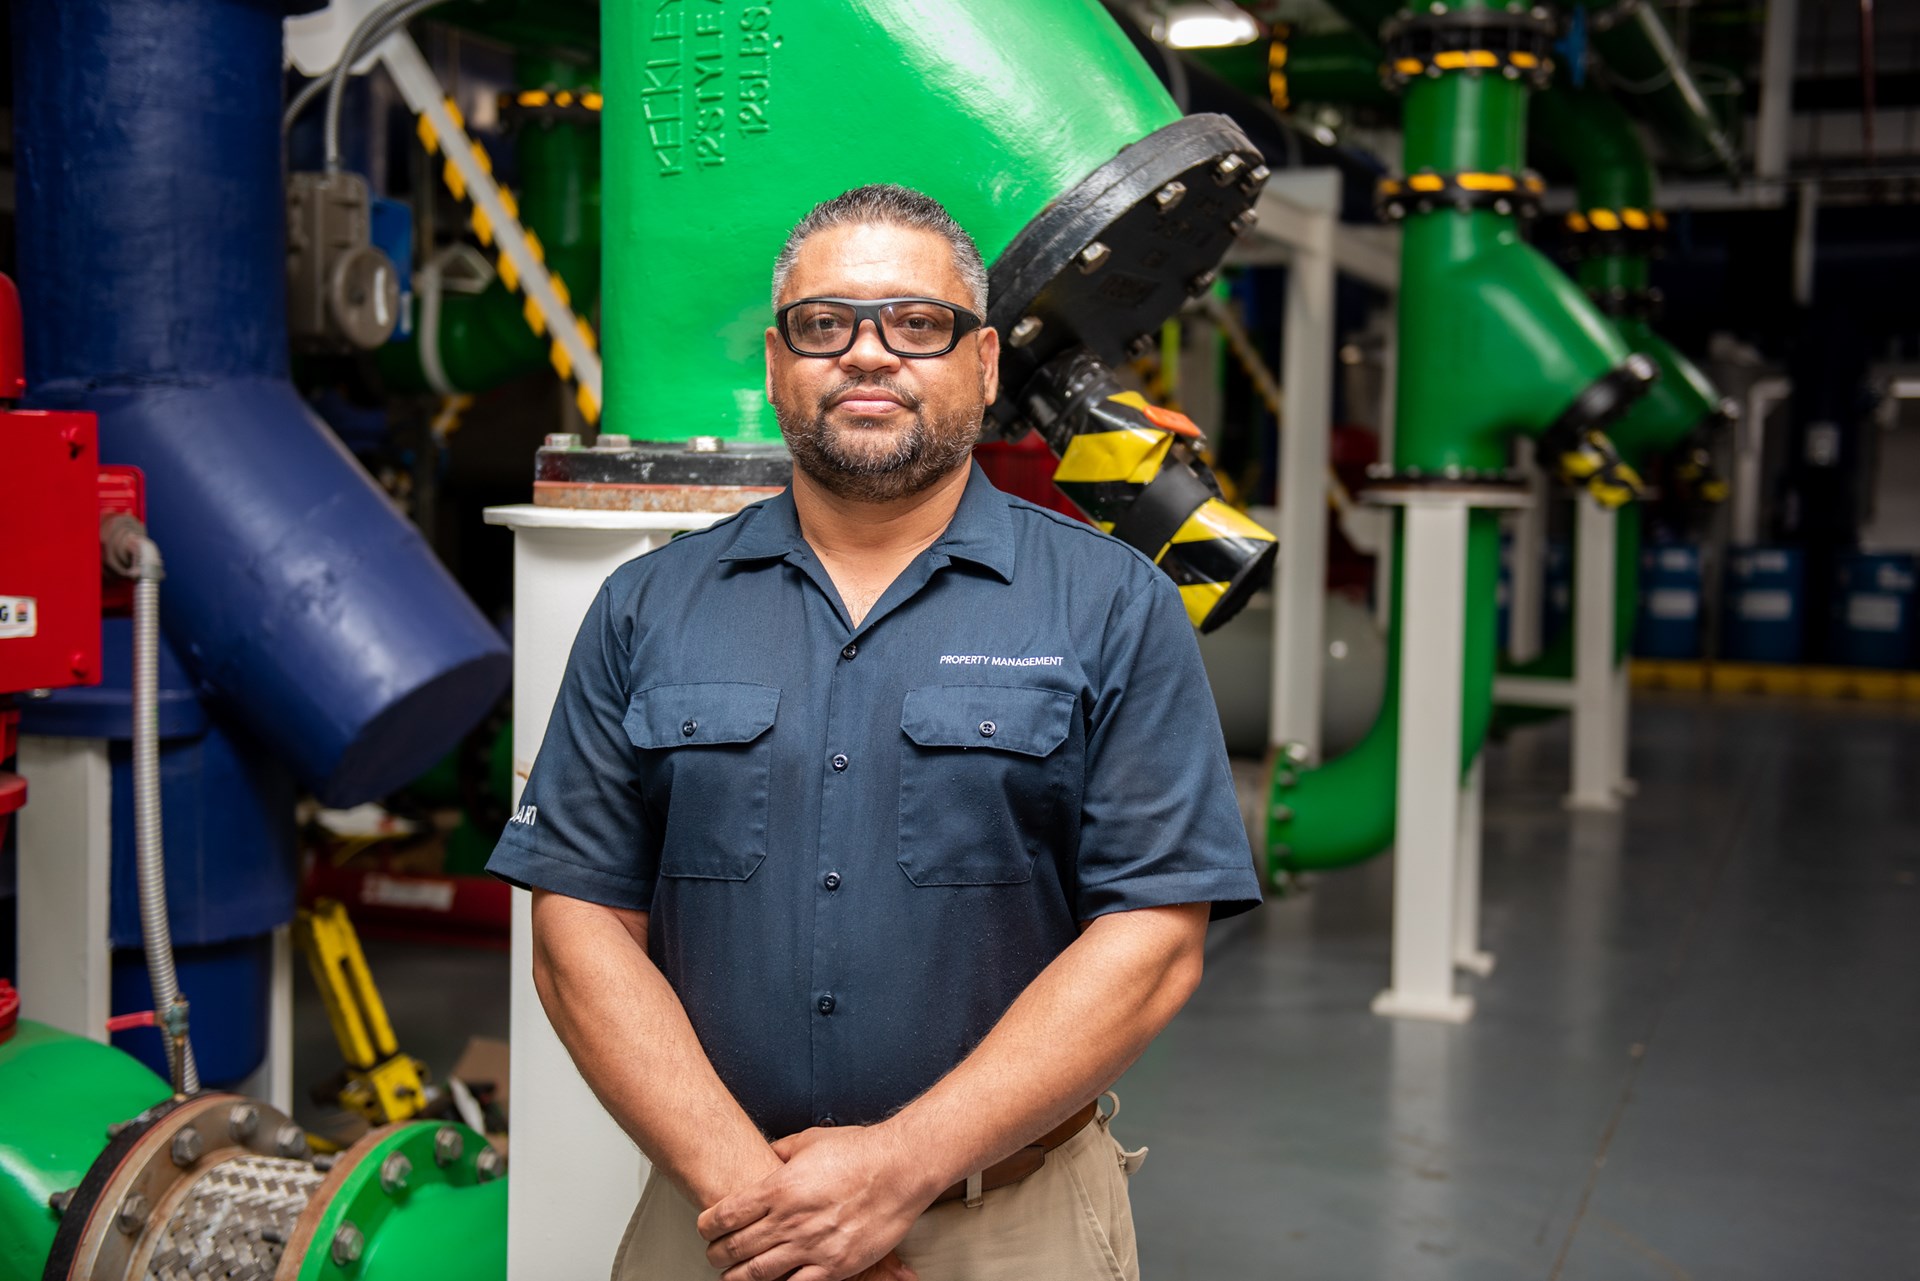 Man of colour standing in front of green thermal units